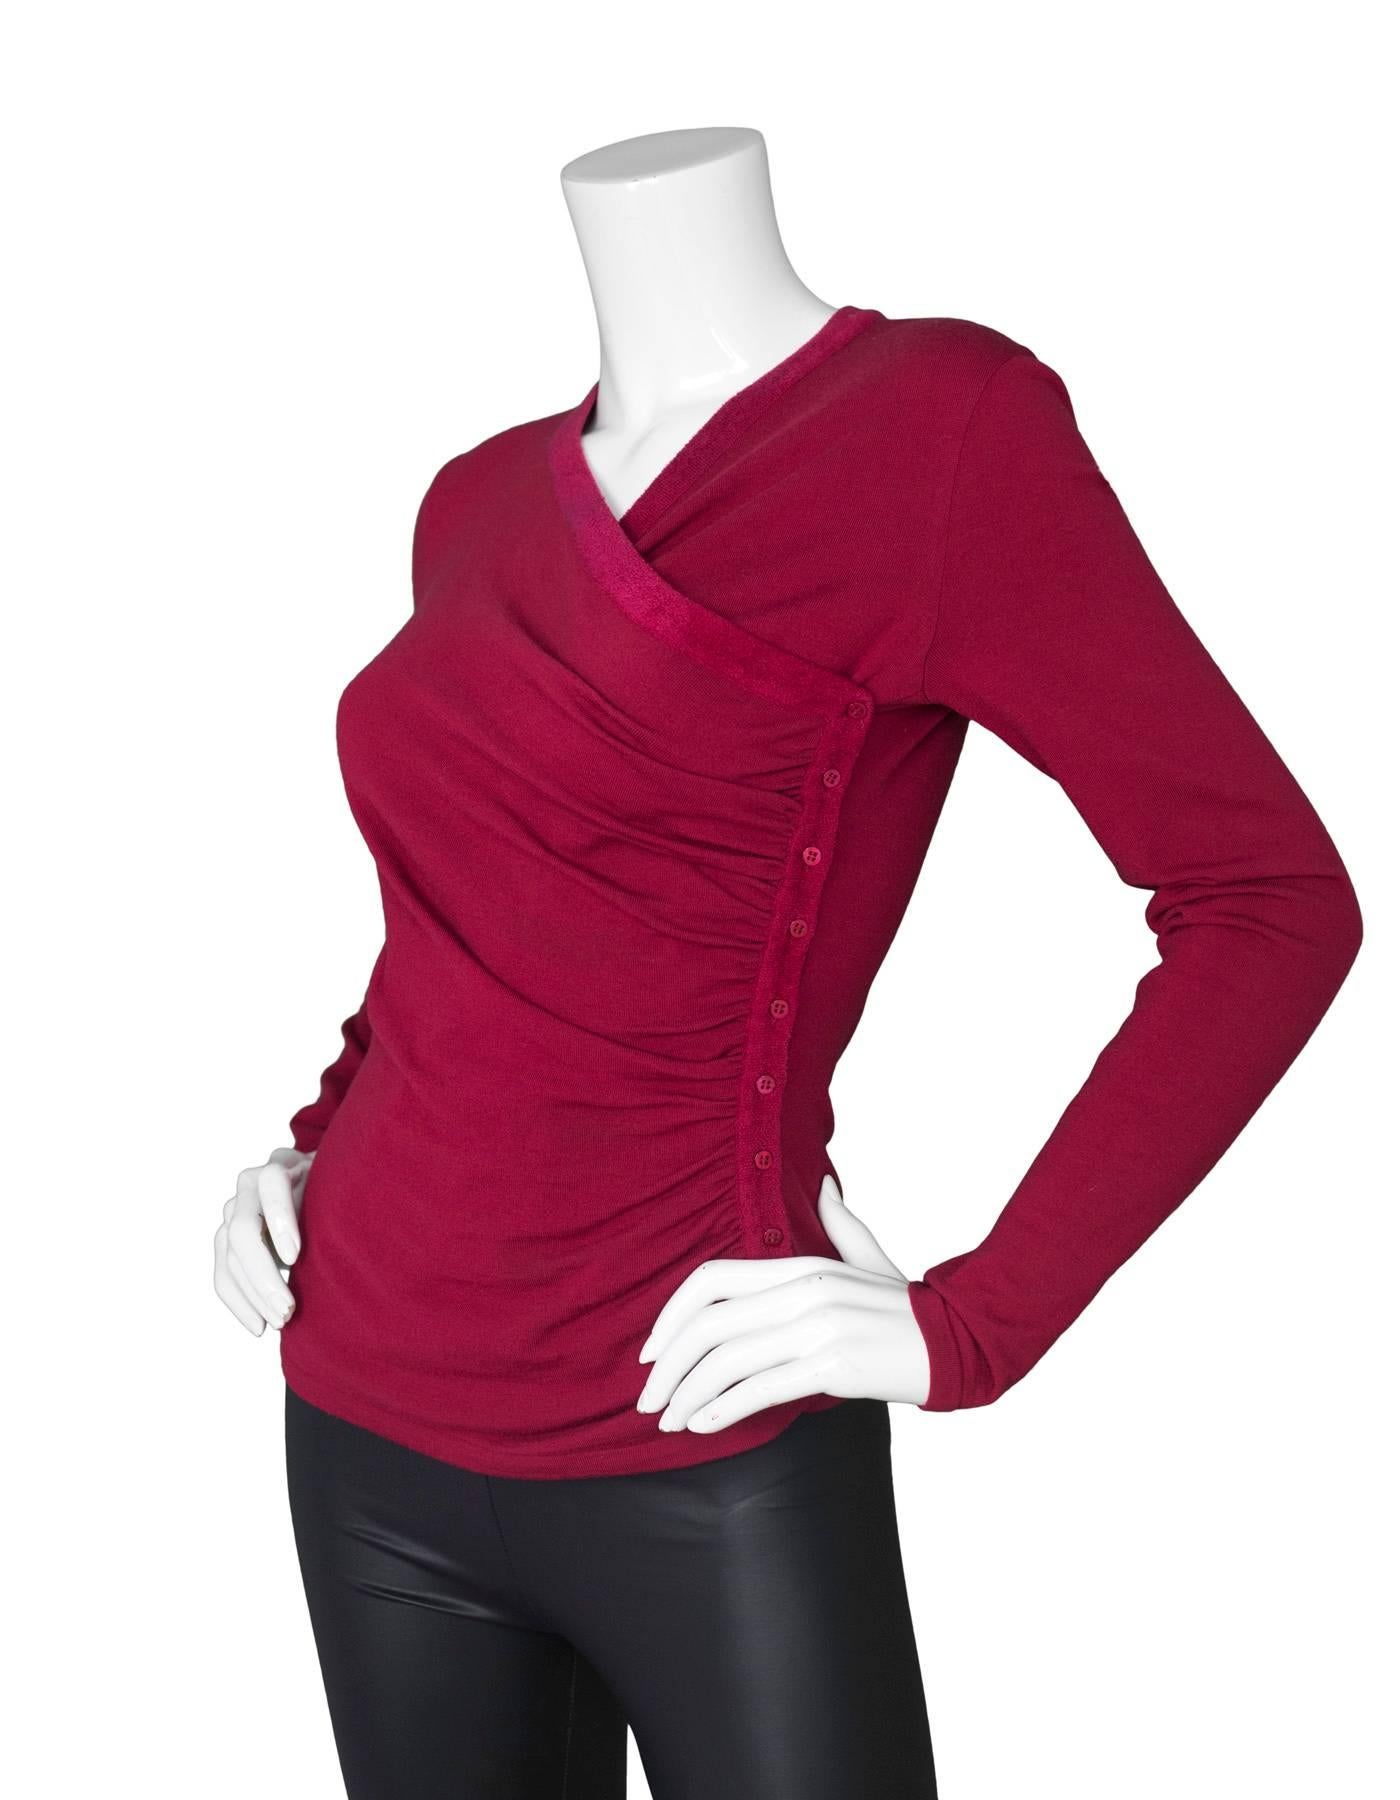 Alaia Burgundy Wool Ruched Long Sleeve Top 
Features buttons and ruching down side of shirt

Made In: Italy
Color: Burgundy
Composition: 84% wool, 14 polyester, 2% cupro
Lining: None
Closure/Opening: Pull over
Exterior Pockets: None
Interior